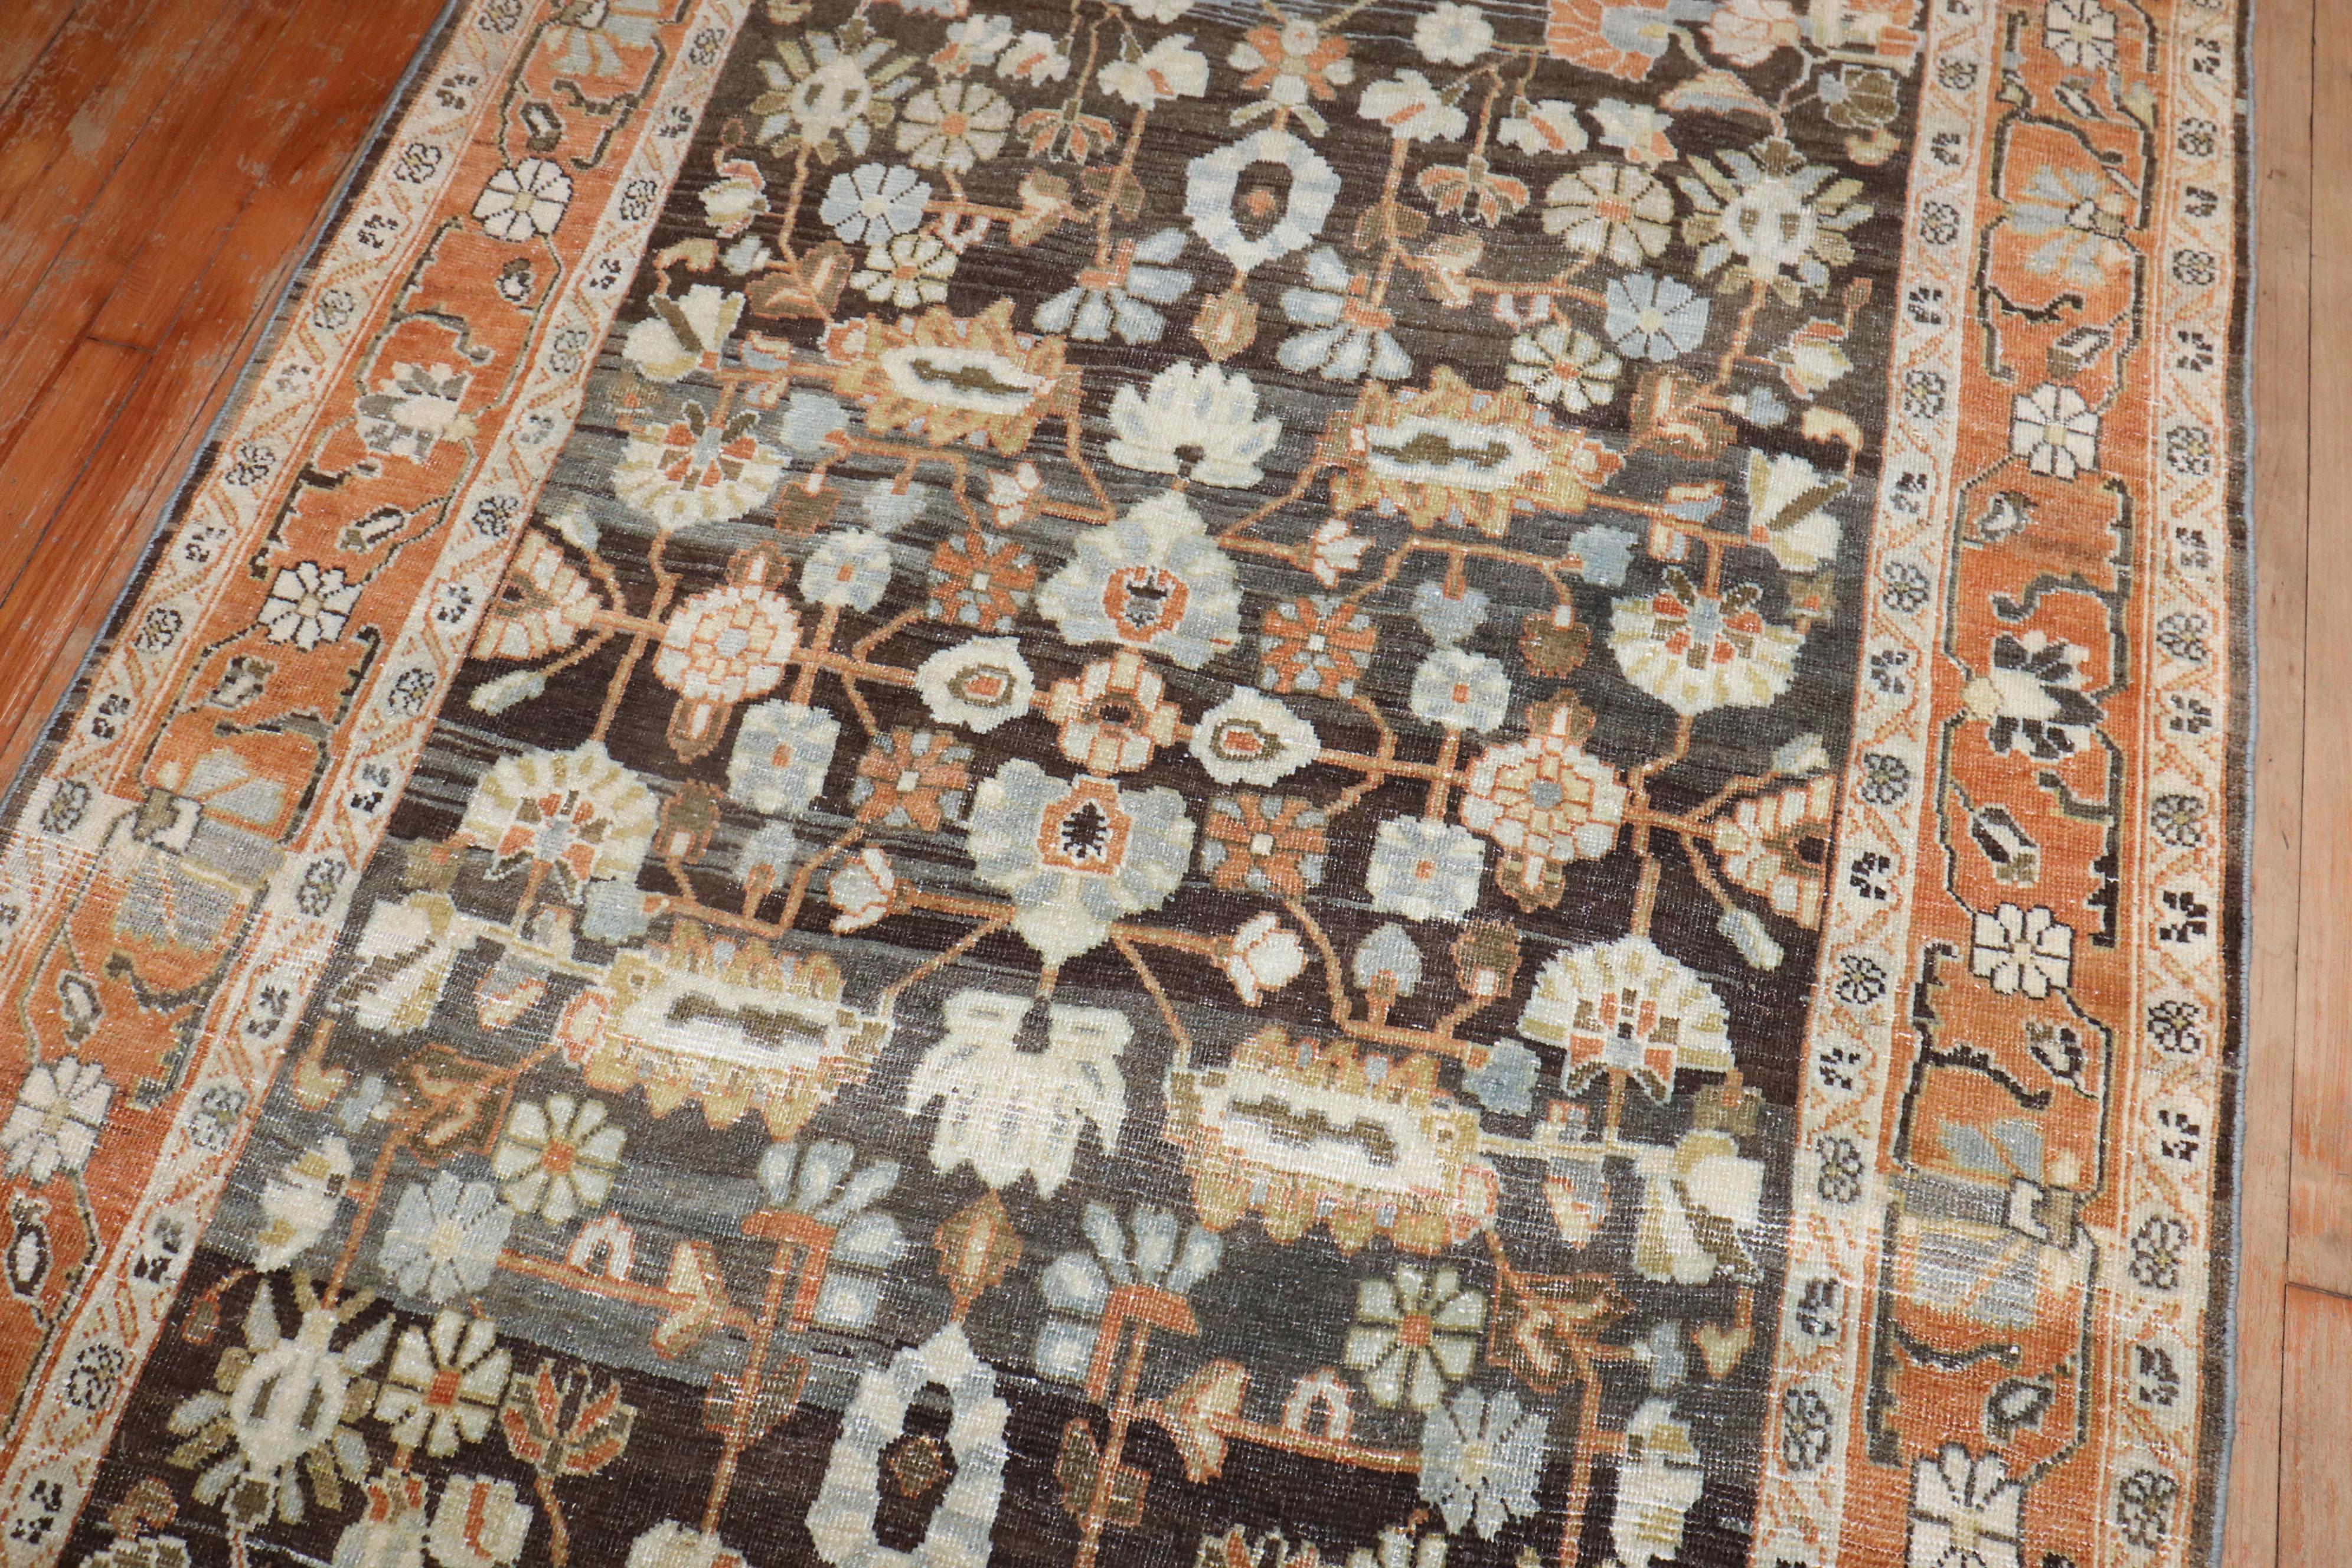 1920s Accent Size Persian sarouk rug in predominantly brown 
Rug no. j3259

Size 4' 5